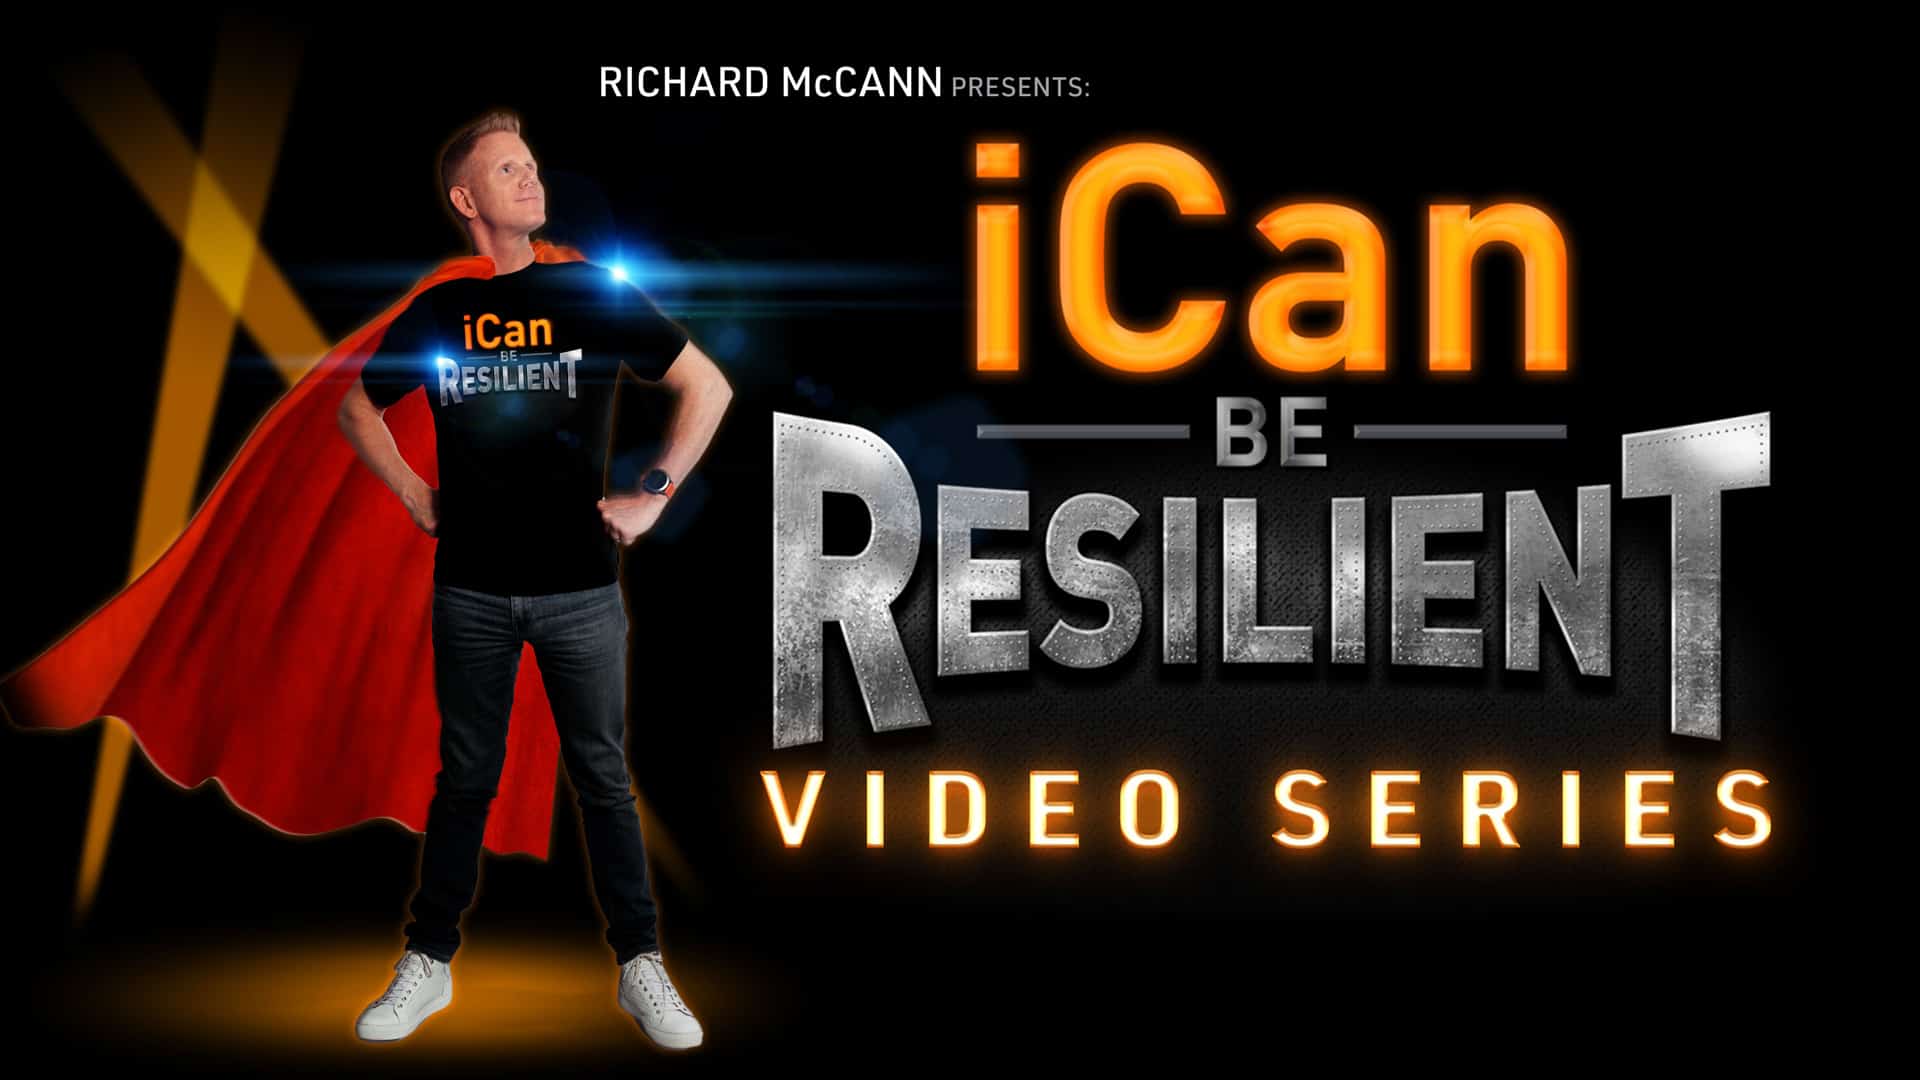 iCan be Resilient Image 